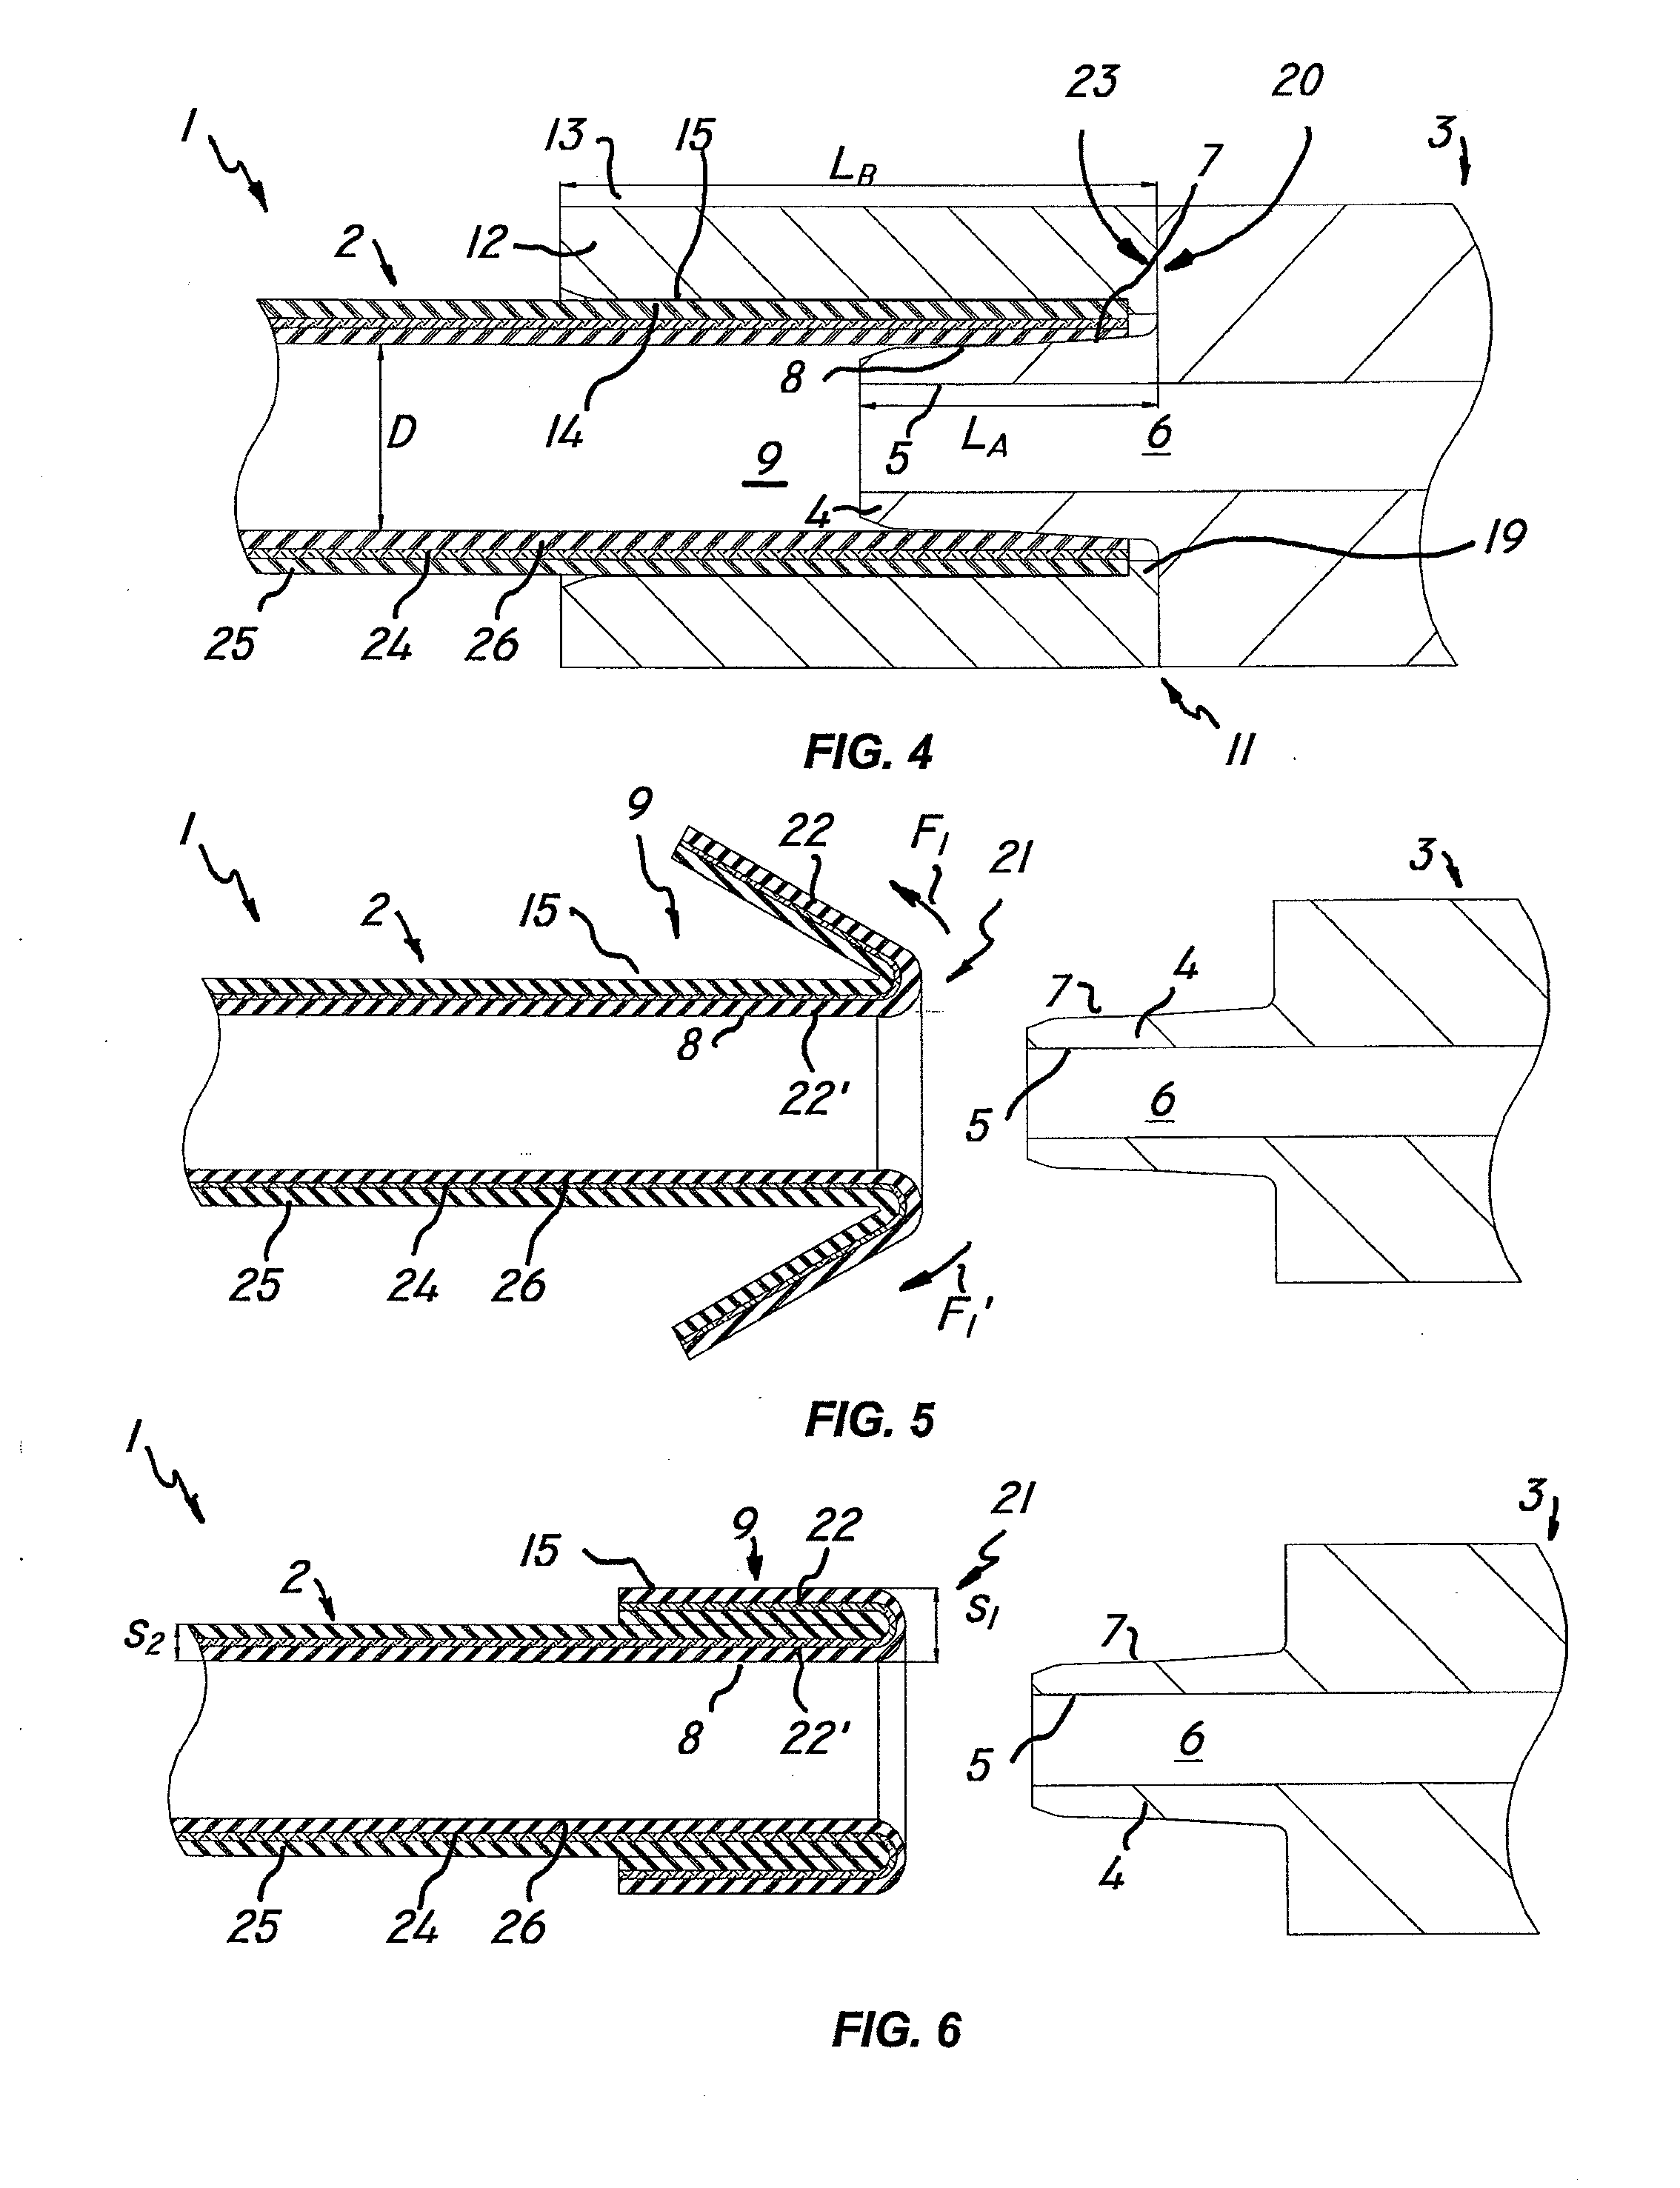 Integral pipe and fitting assembly of polymer material, and method of making same